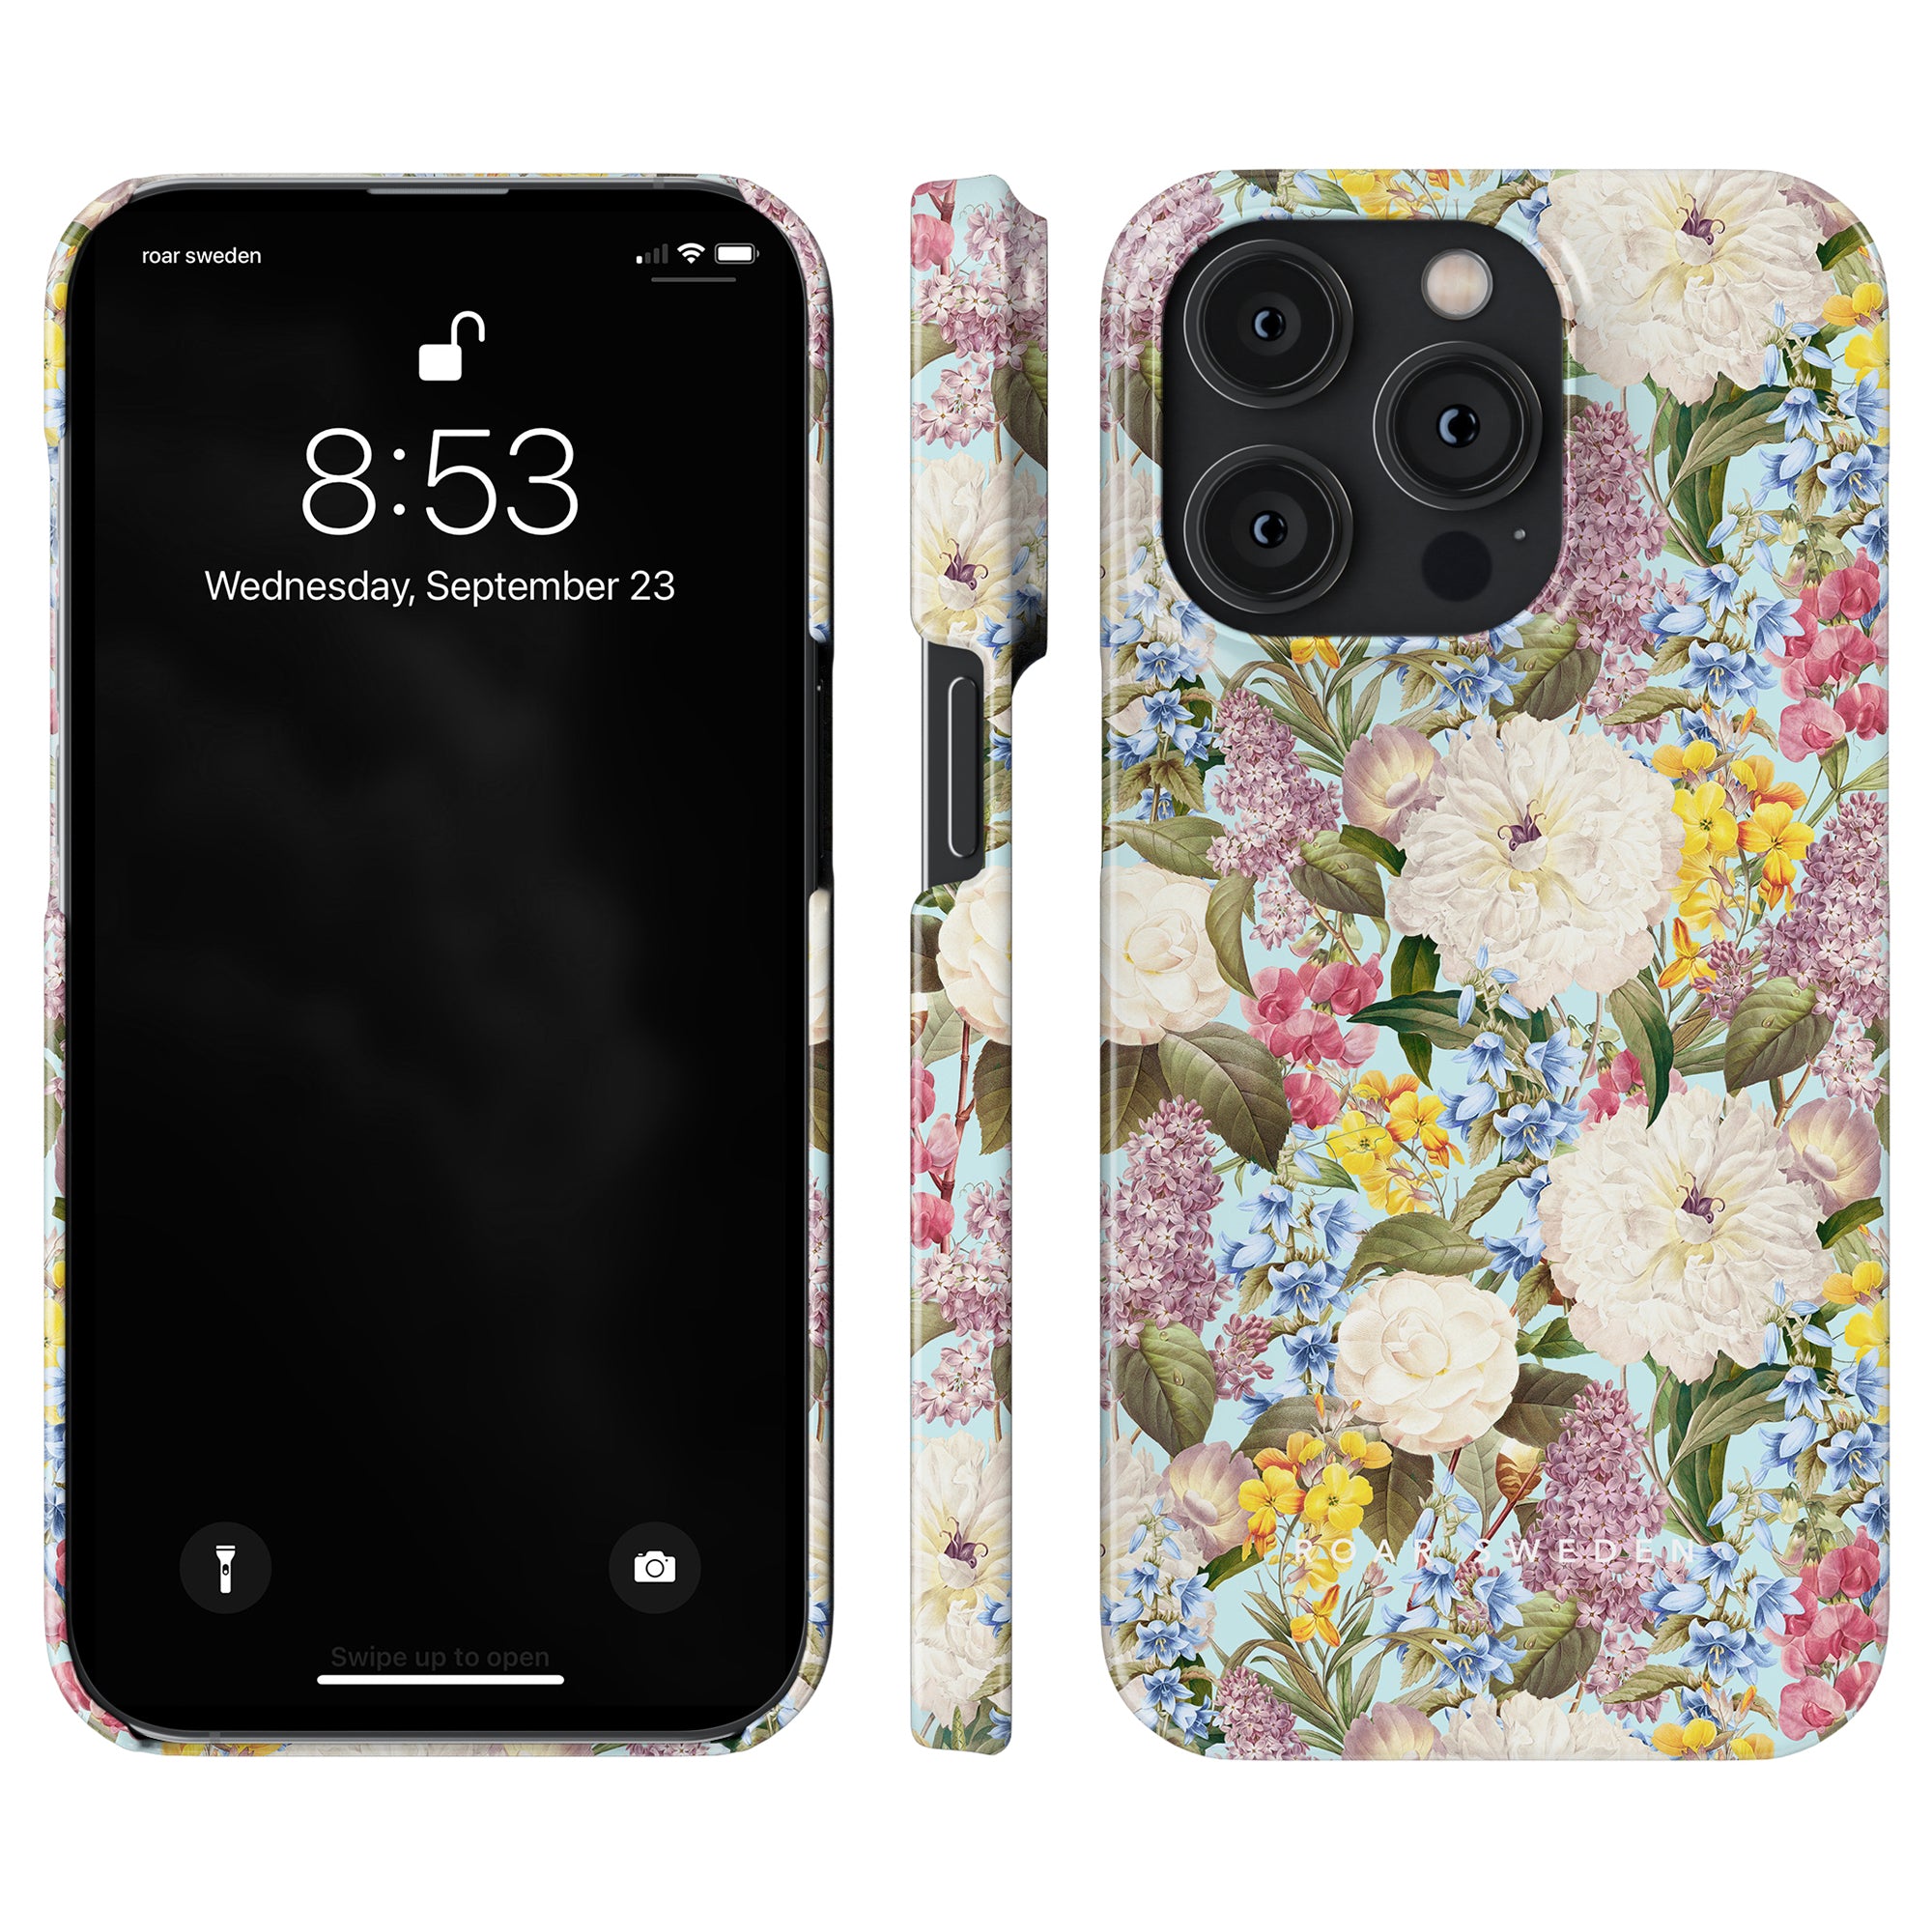 Product description: Front and back view of a smartphone with a Fragrant Paradise - Slim case design, ideal for SEO listing.